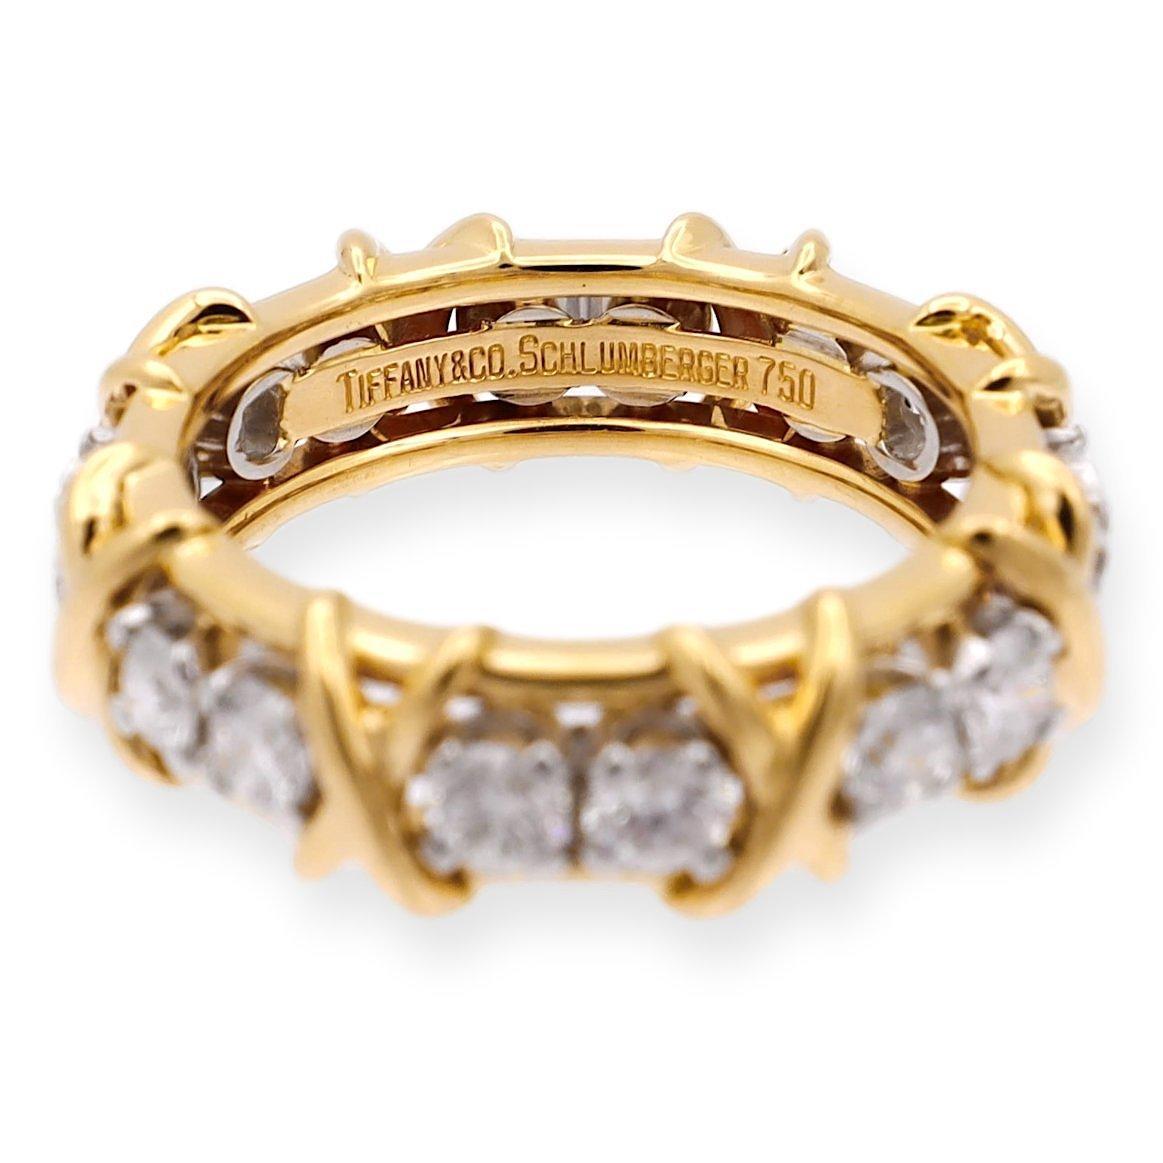 Tiffany & Co. band ring designed by Jean Schlumberger finely crafted Platinum and 18 Karat yellow gold featuring 16 round brilliant cut diamonds weighing 1.14 carats total weight approximately in F color and very fine VS clarity.

Ring